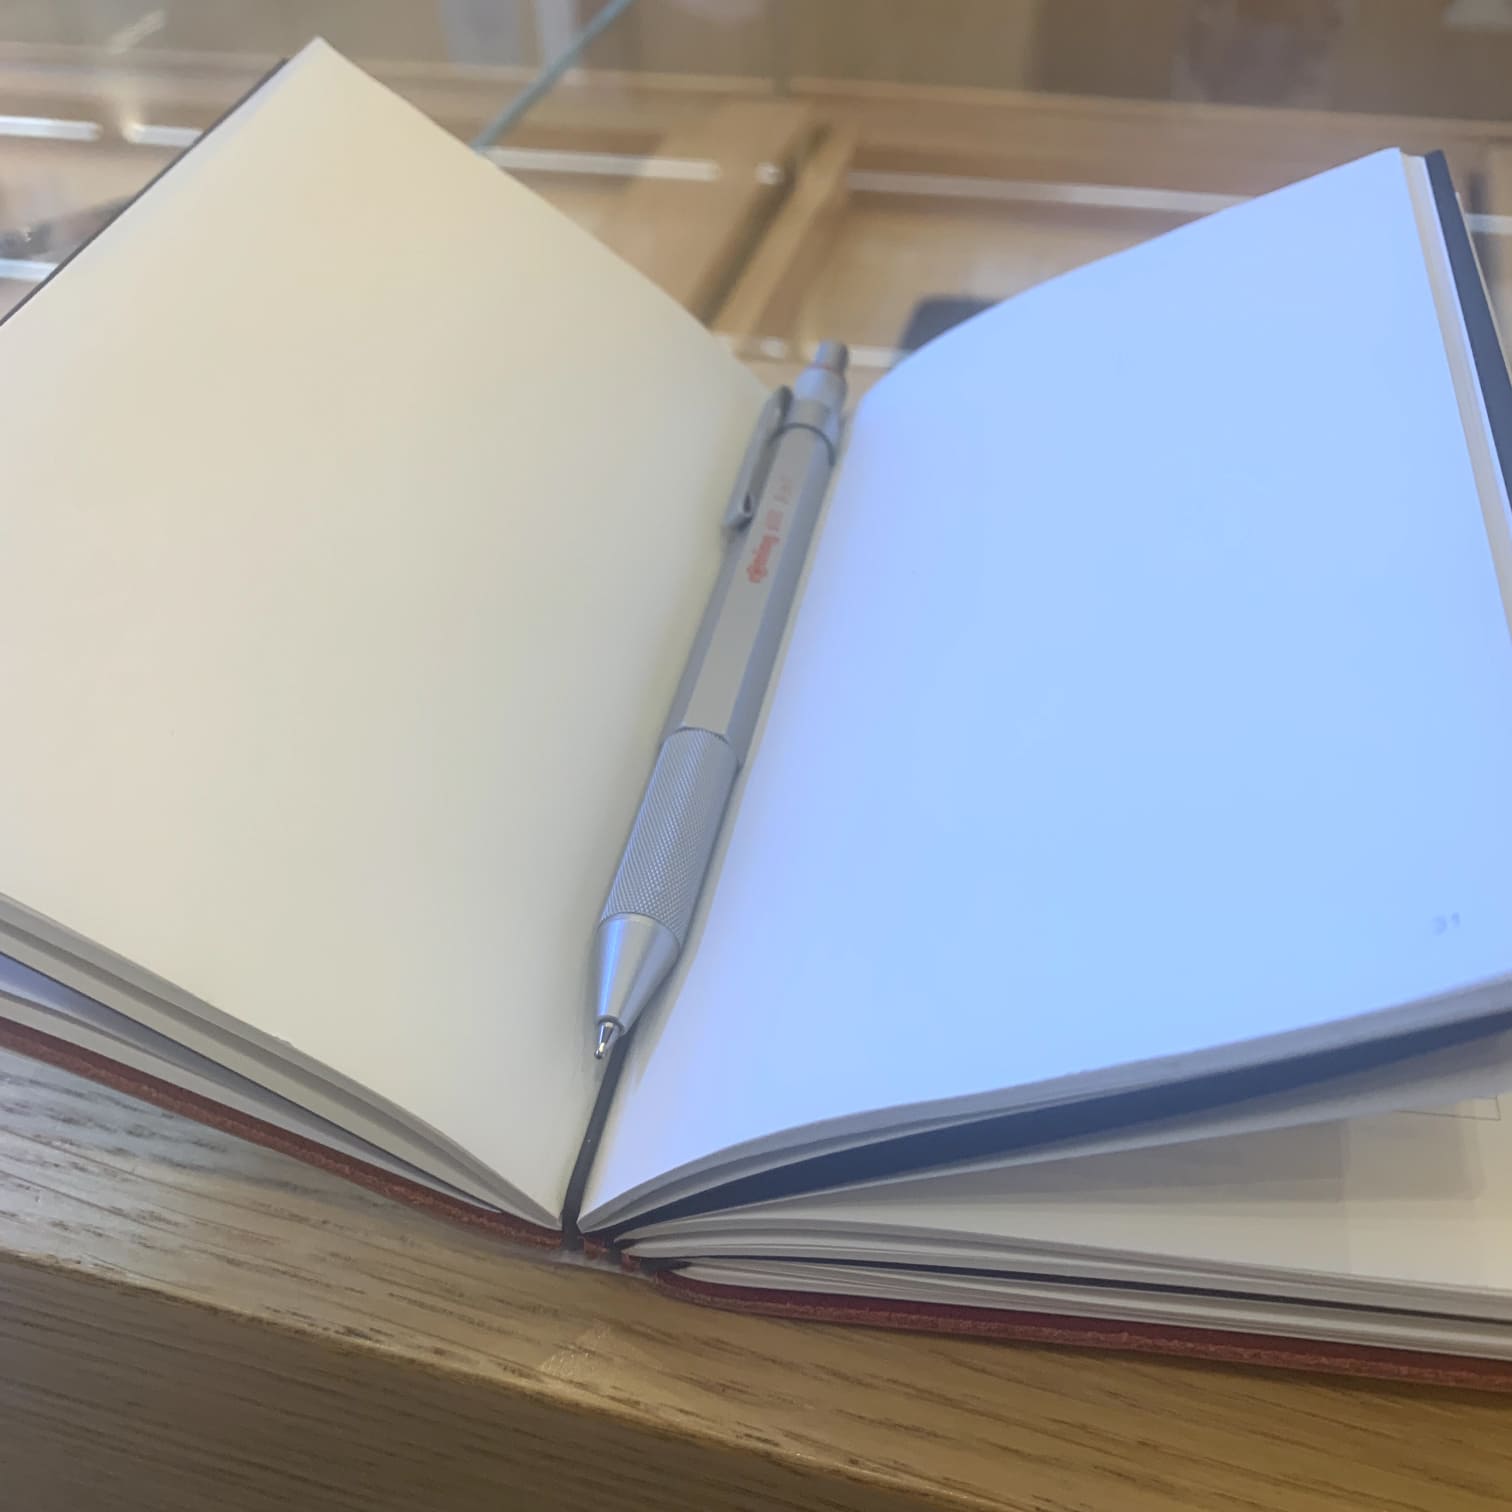 Fully open x17 rechargeable notebook on a white page with a Rotring 600 on the middle. Perfectly displays the benefits of the x17 biding system that allows you to use all the surface paper available.